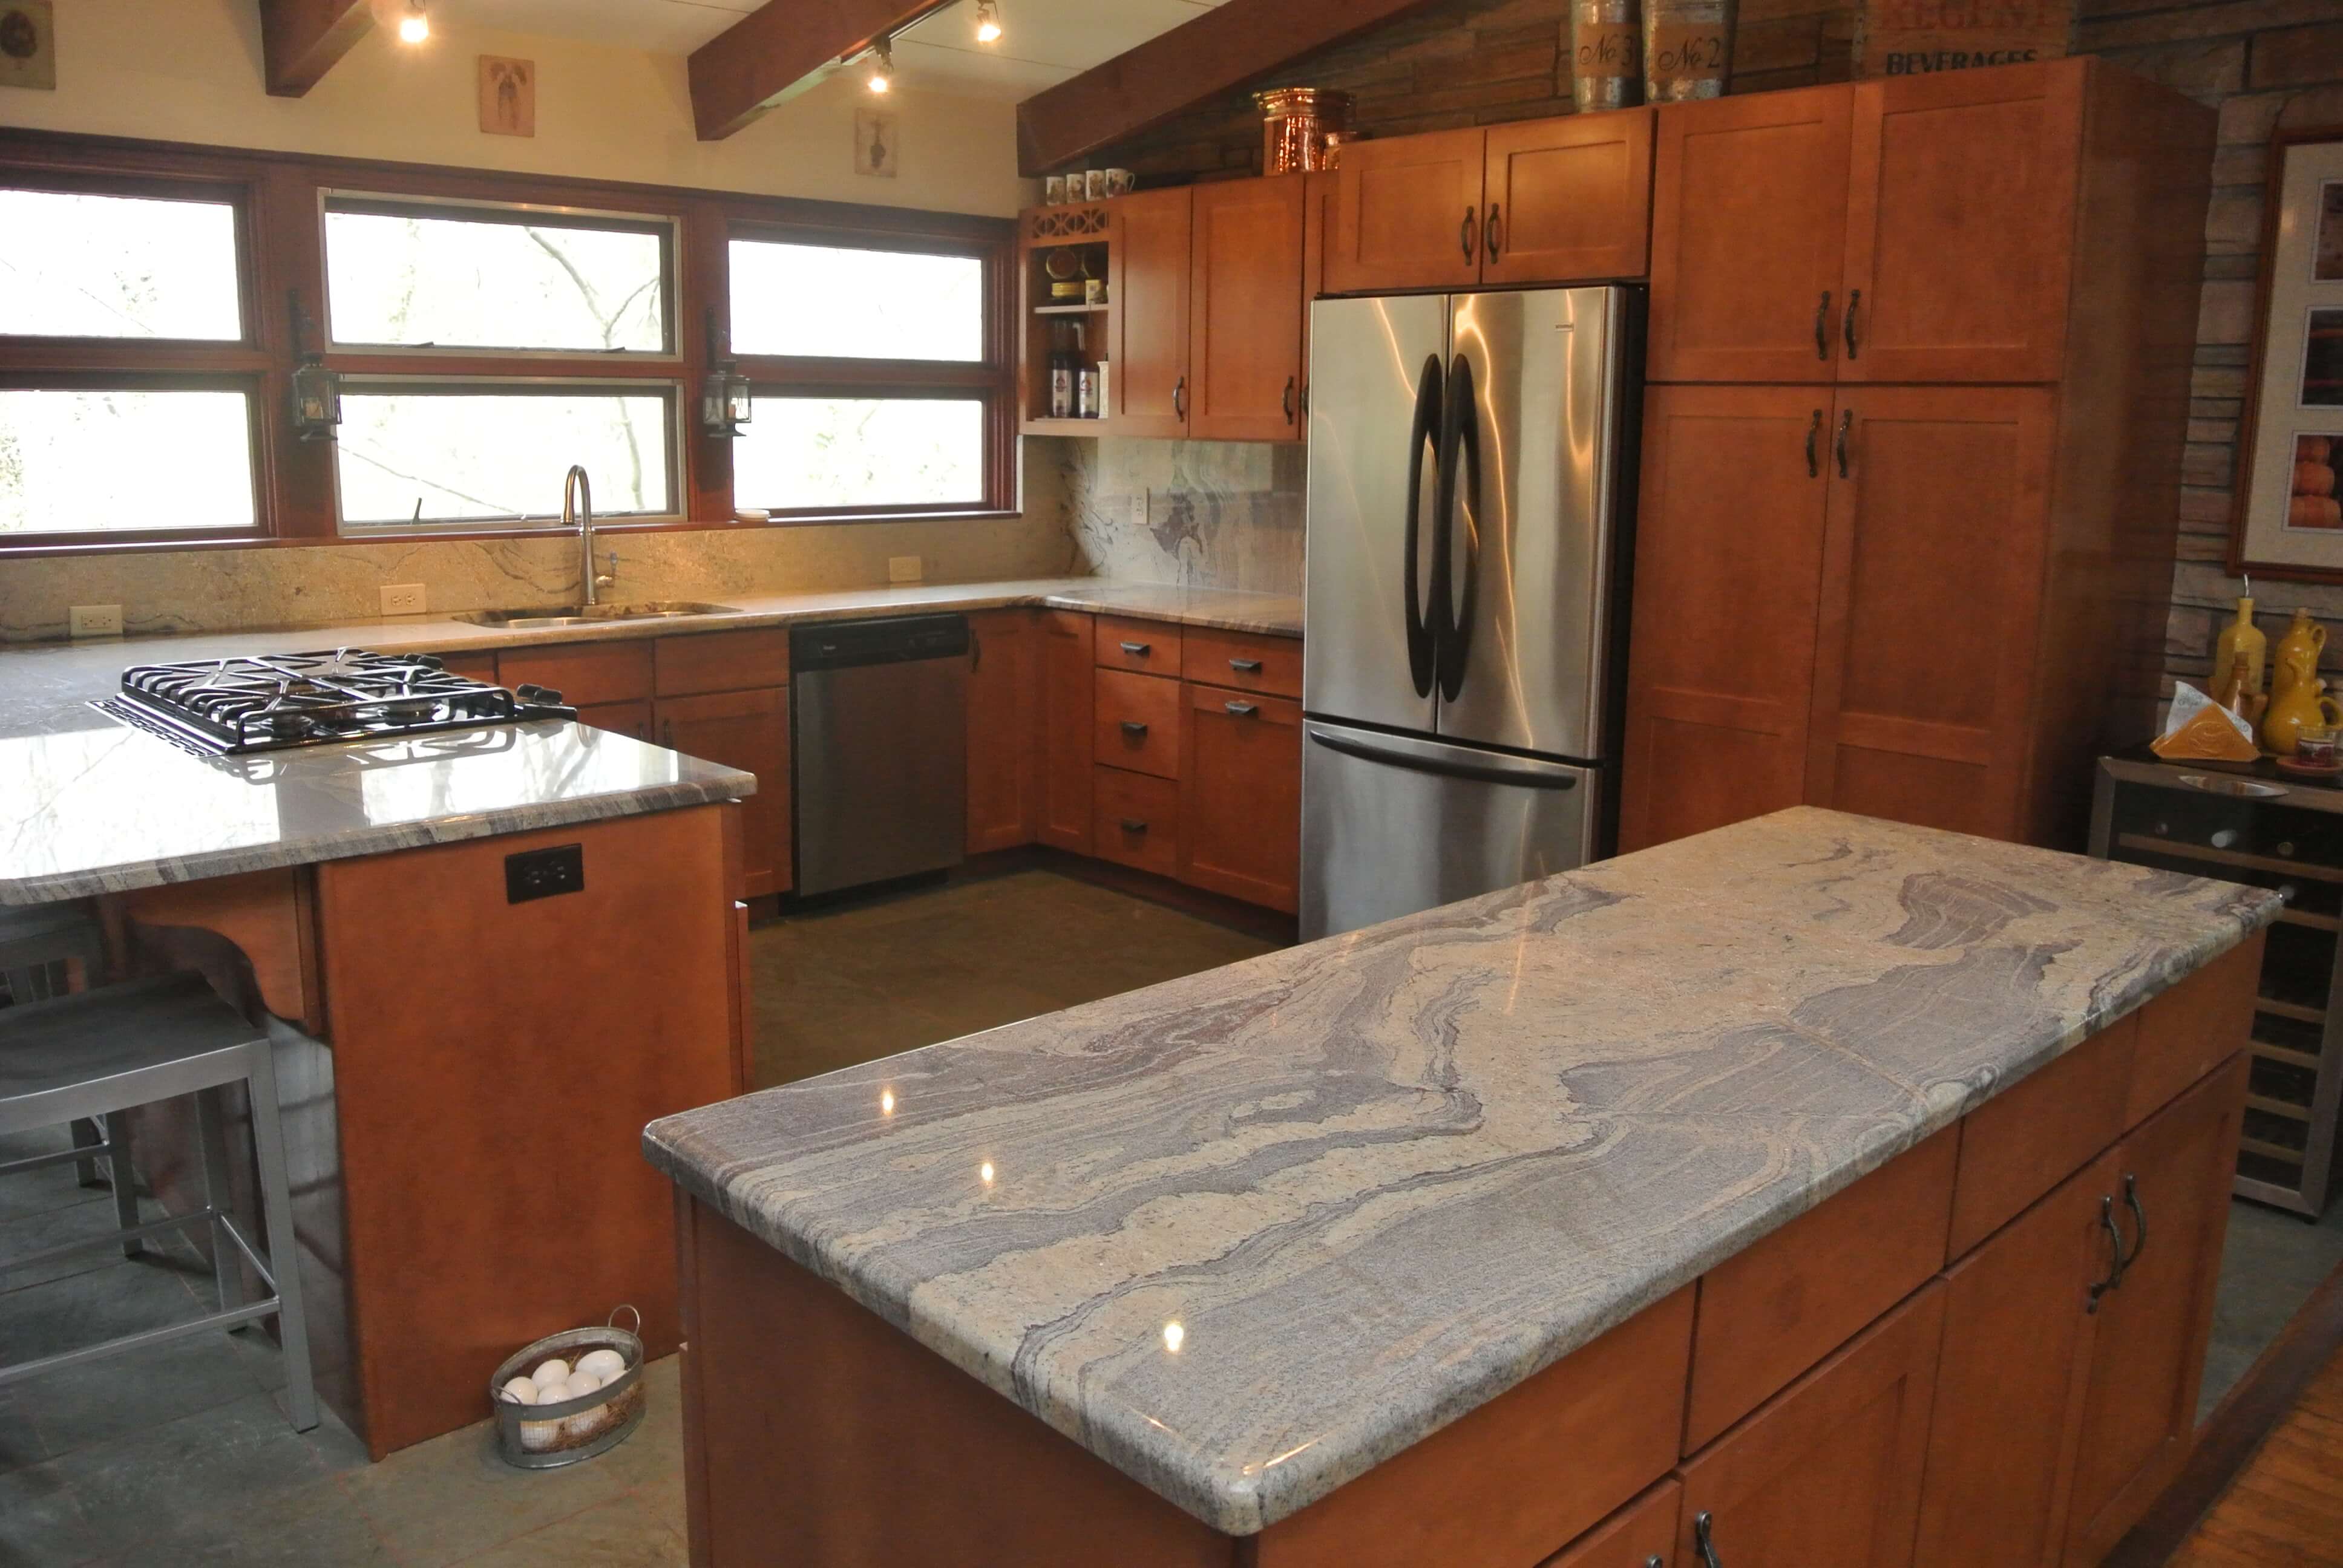 Using granite countertops in your kitchen guarantees a polished look.